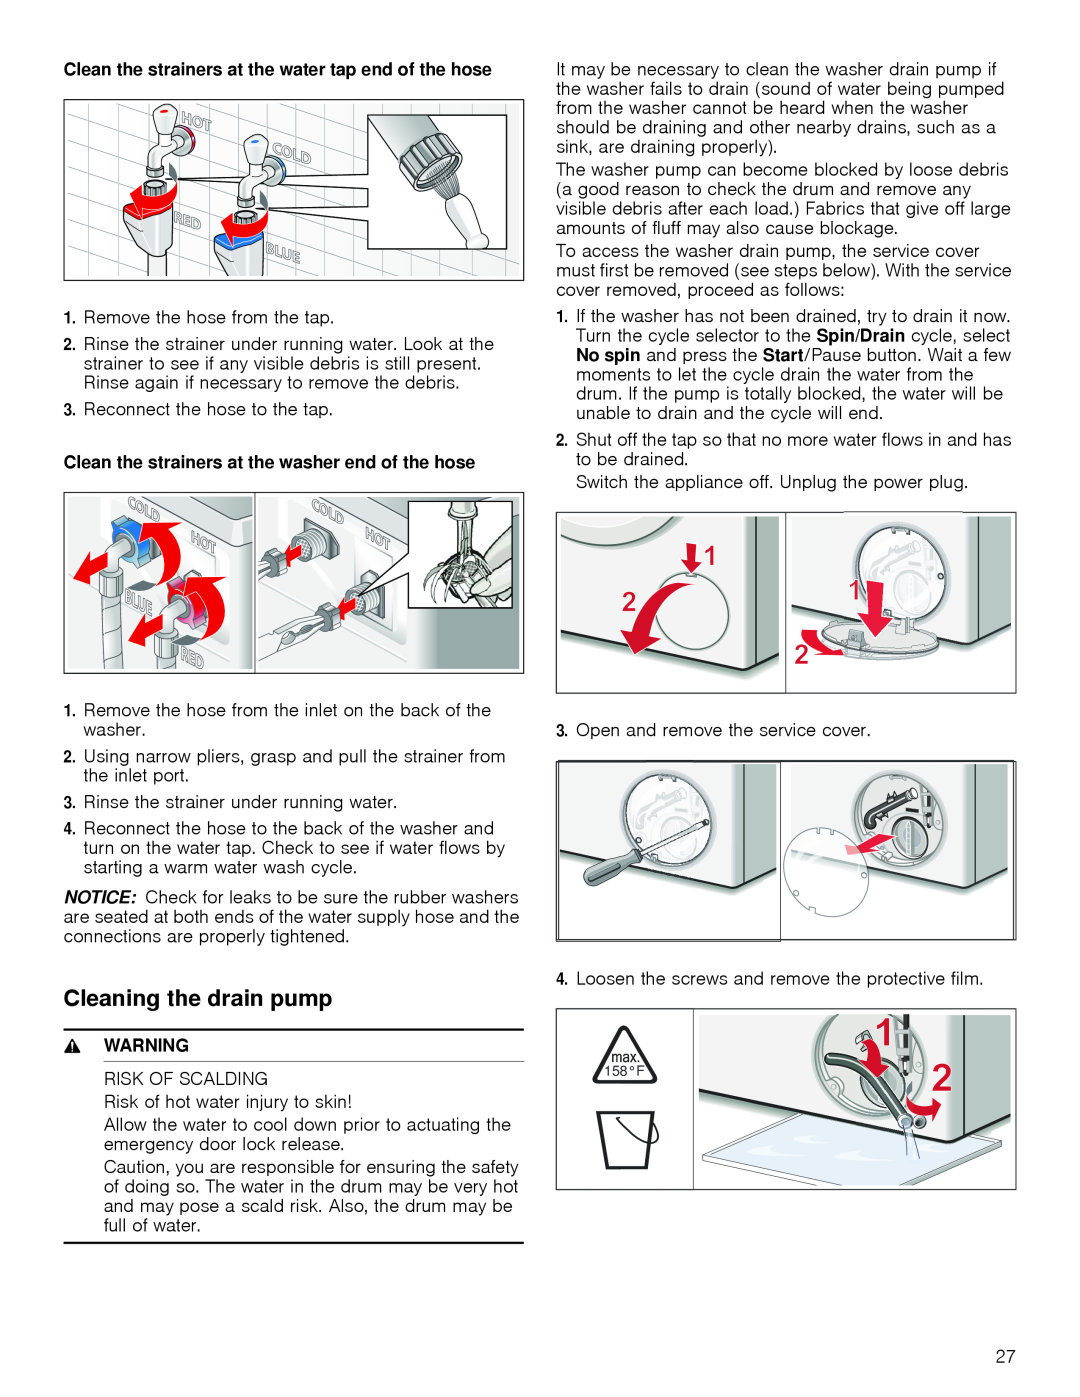 Bosch Appliances WAP24201UC manual Cleaning the drain pump, Clean the strainers at the water tap end of the hose, Warning 